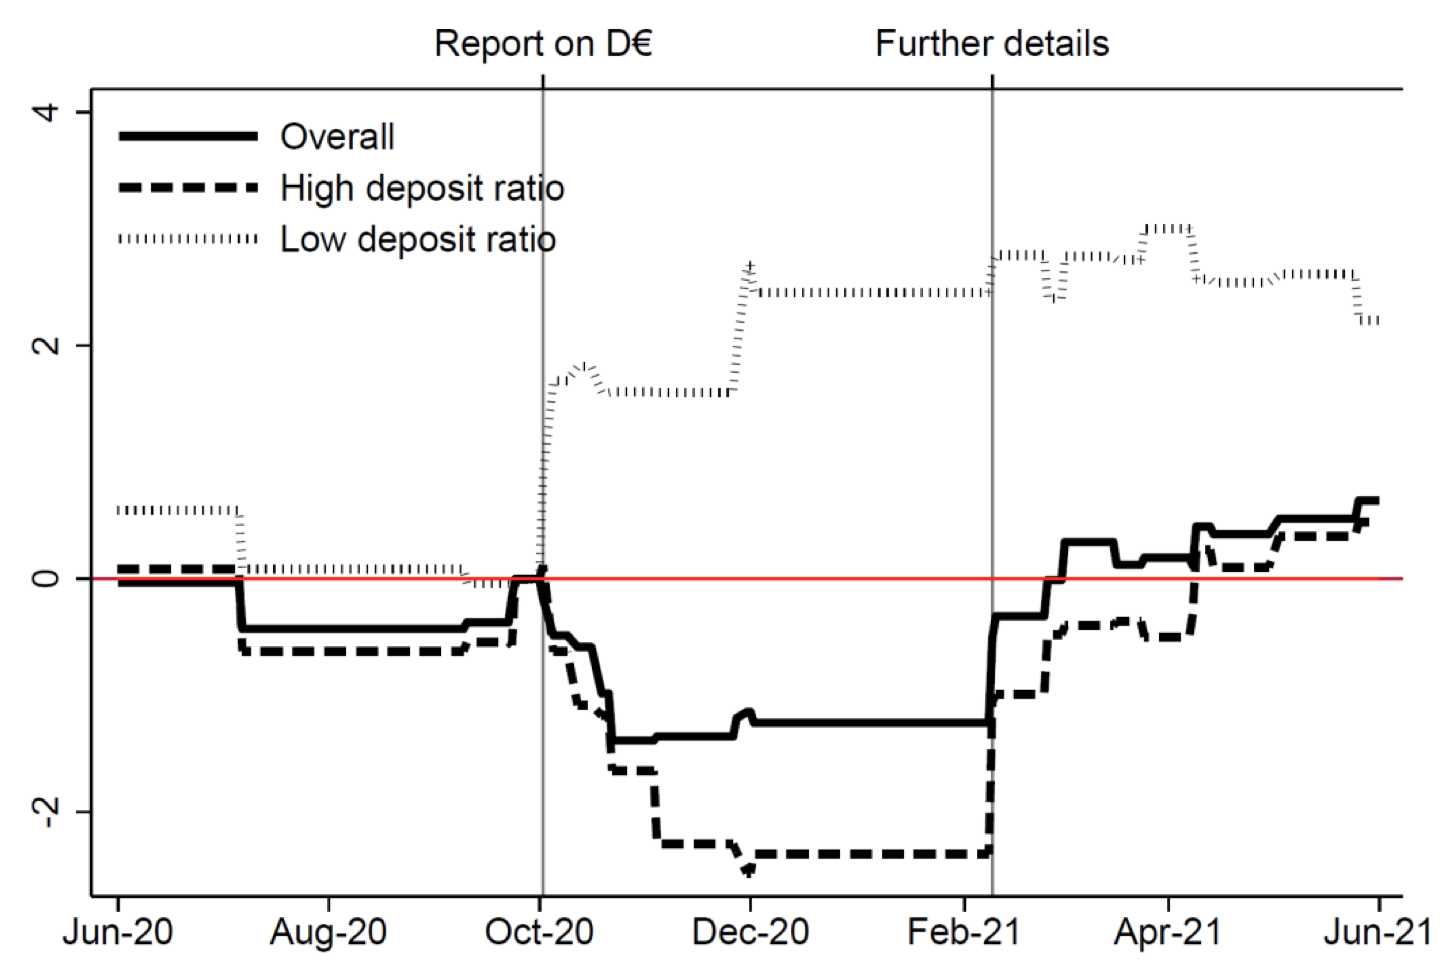 Figure 1 Euro area banks’ stock market reactions to news about central bank digital currency